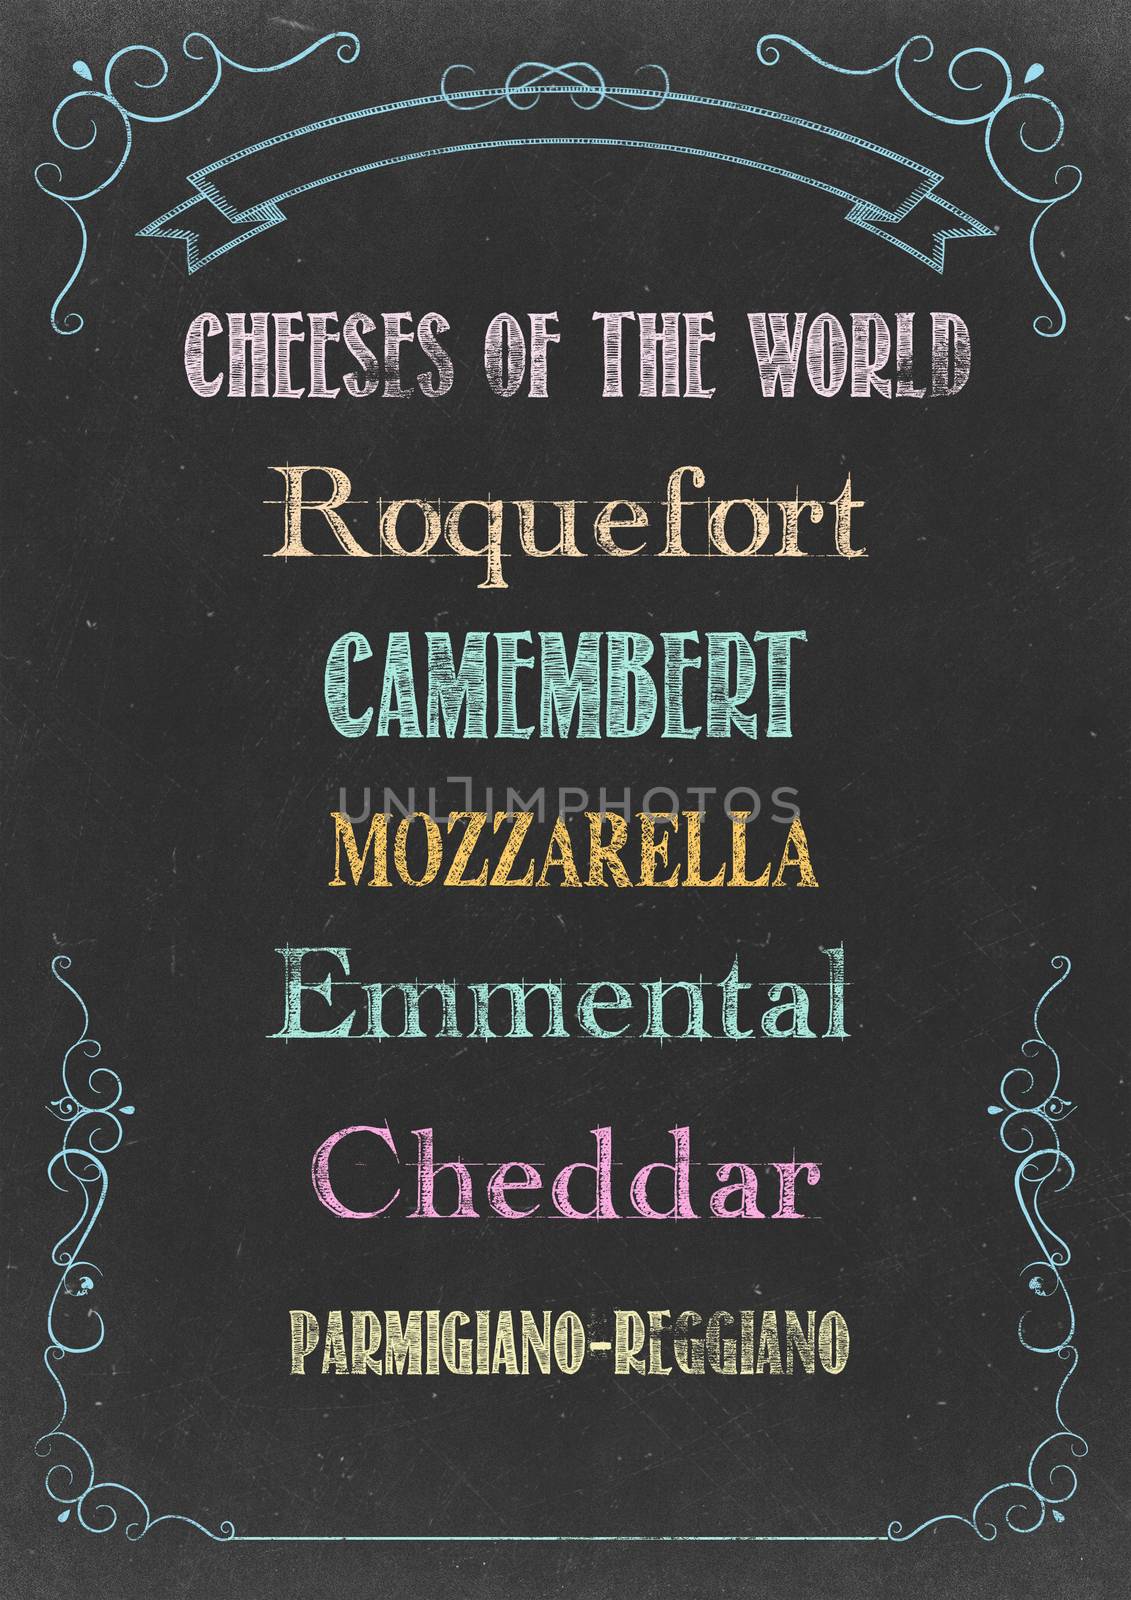 Chalkboard with "CHEESE  MENU" Hand Drawn in Chalks